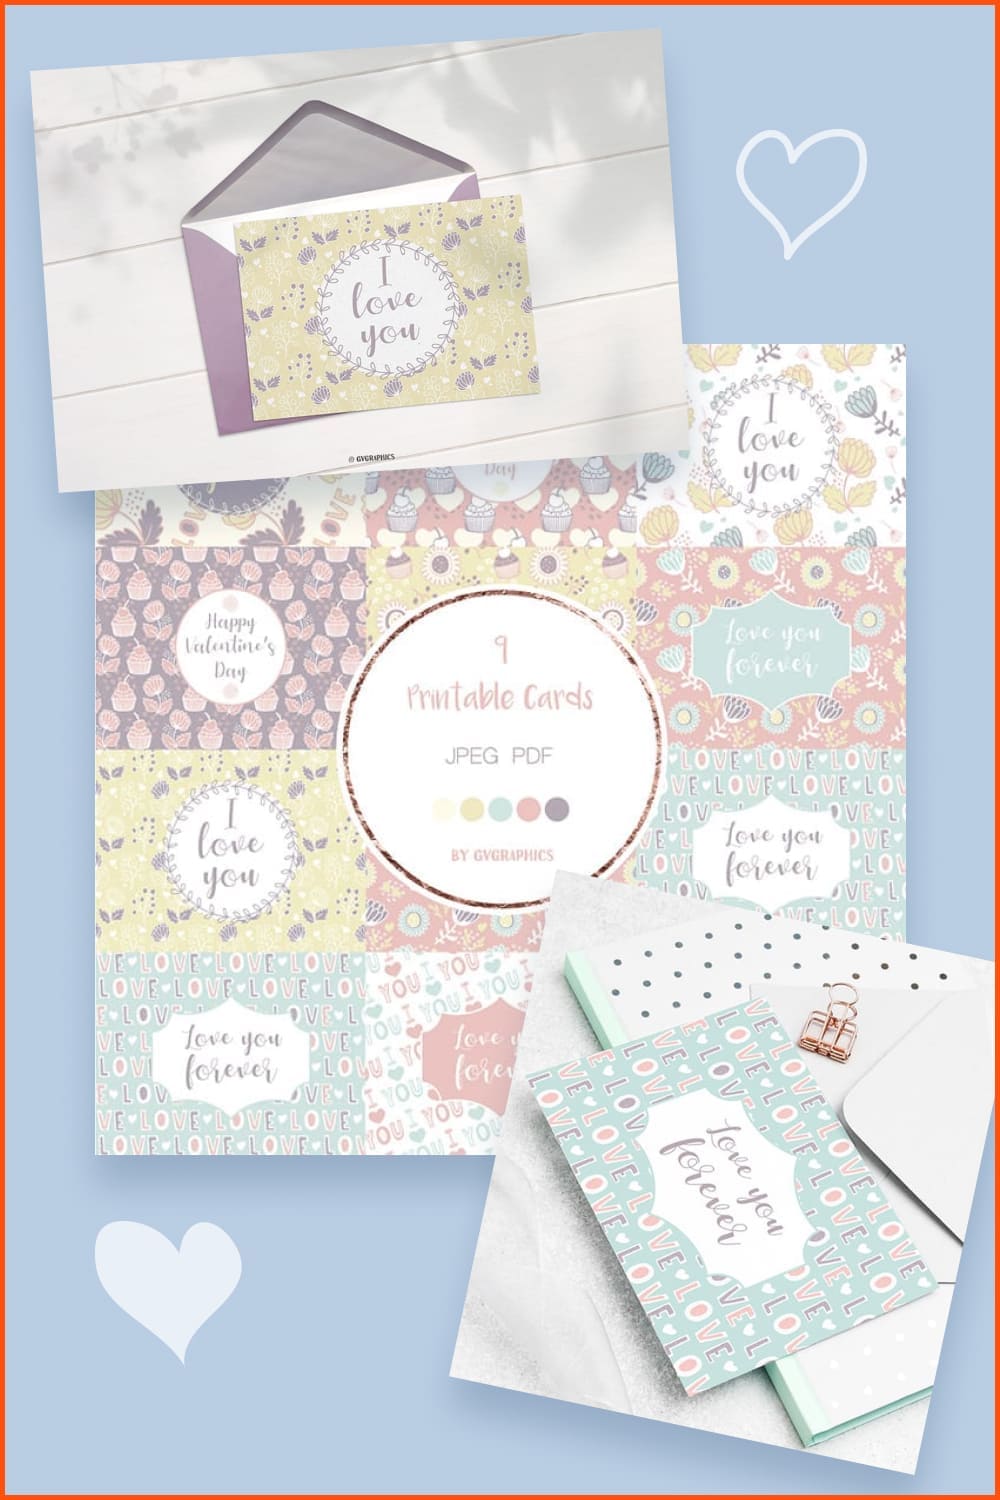 Postcards in pastel colors.